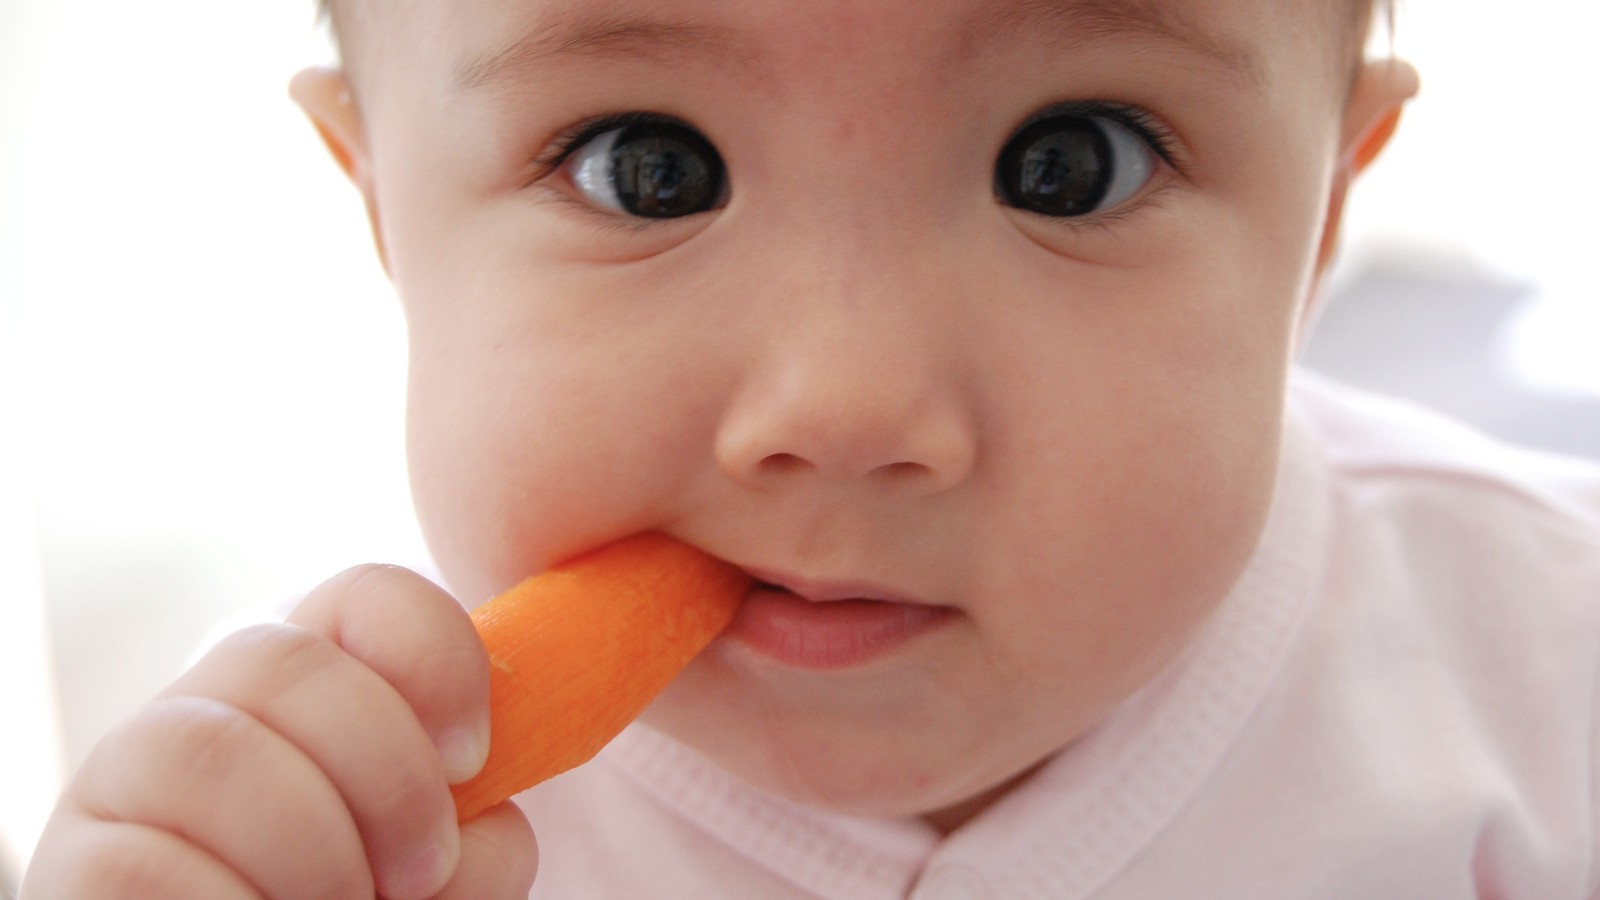 Why Americans Are Obsessed With Orange Baby Carrots - The Atlantic